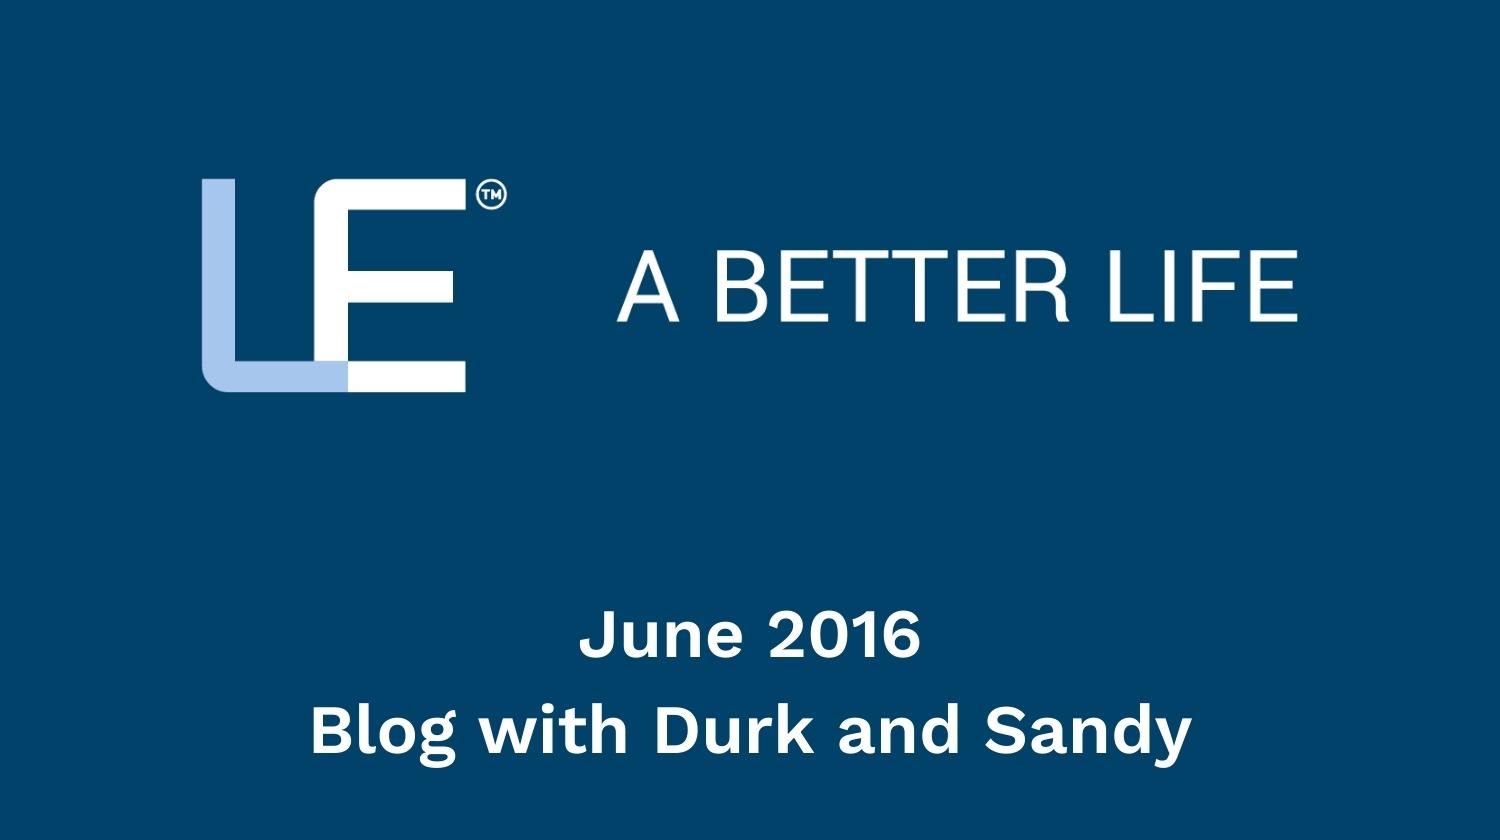 June 2016 Blog with Durk and Sandy